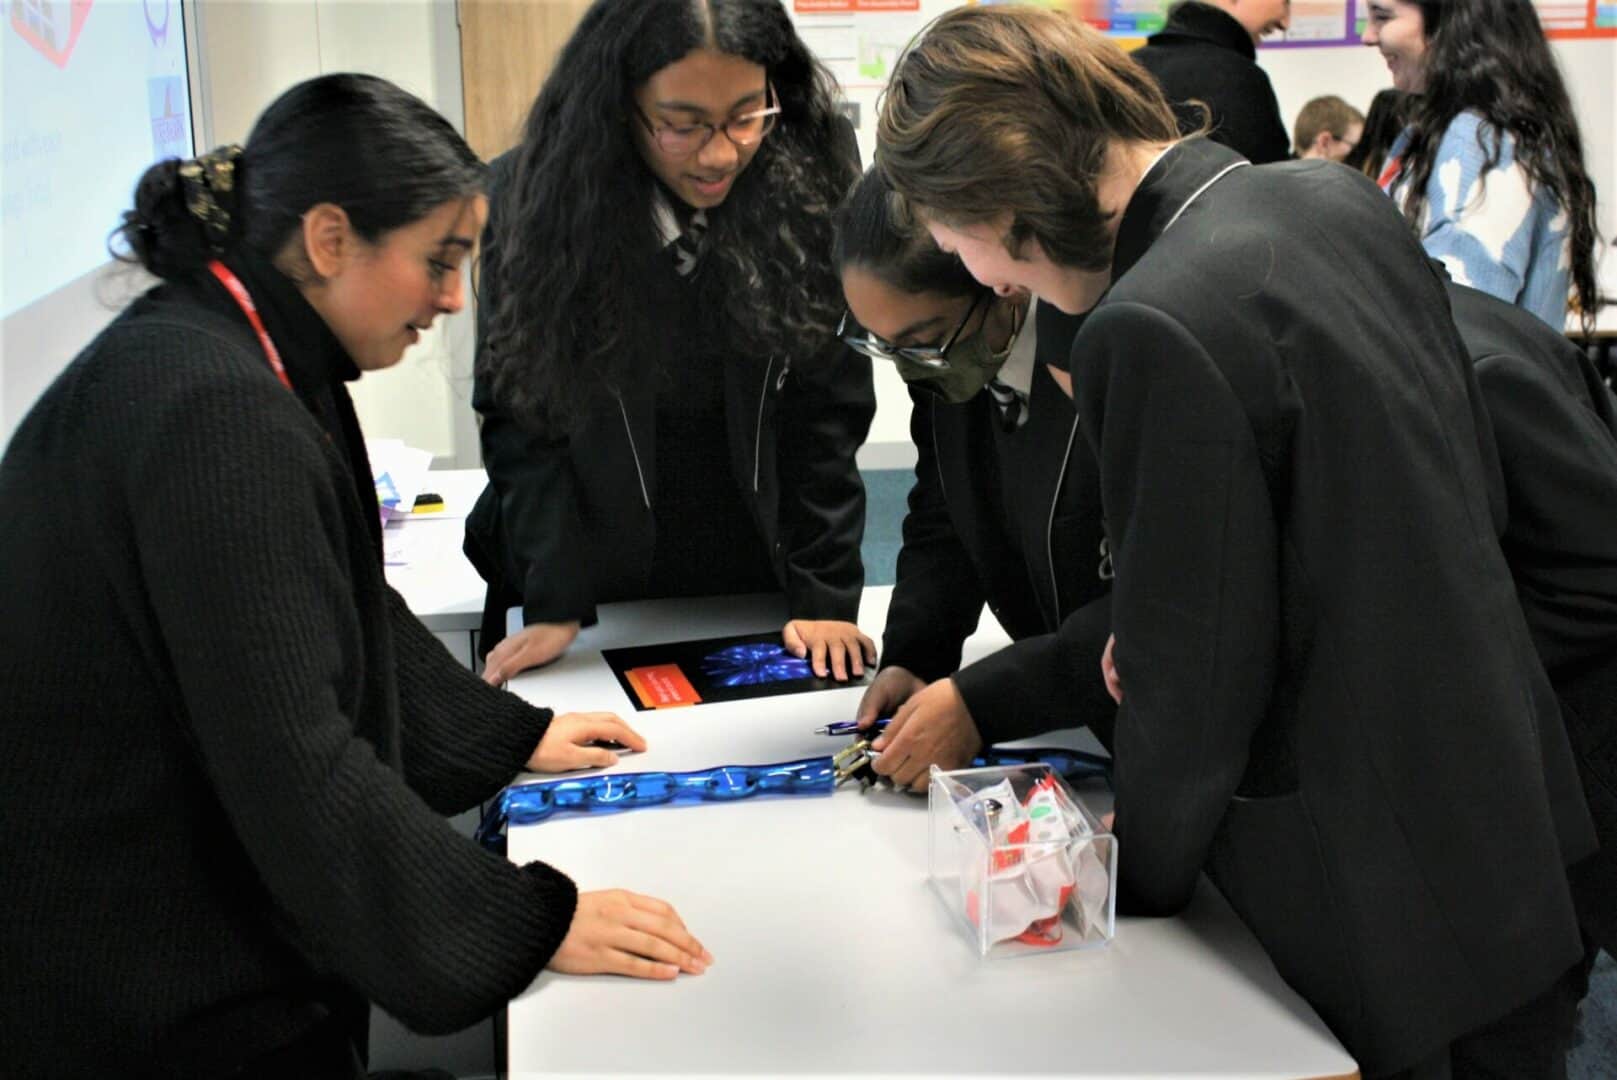 students gather around a table, working together on a task as part of the workshop